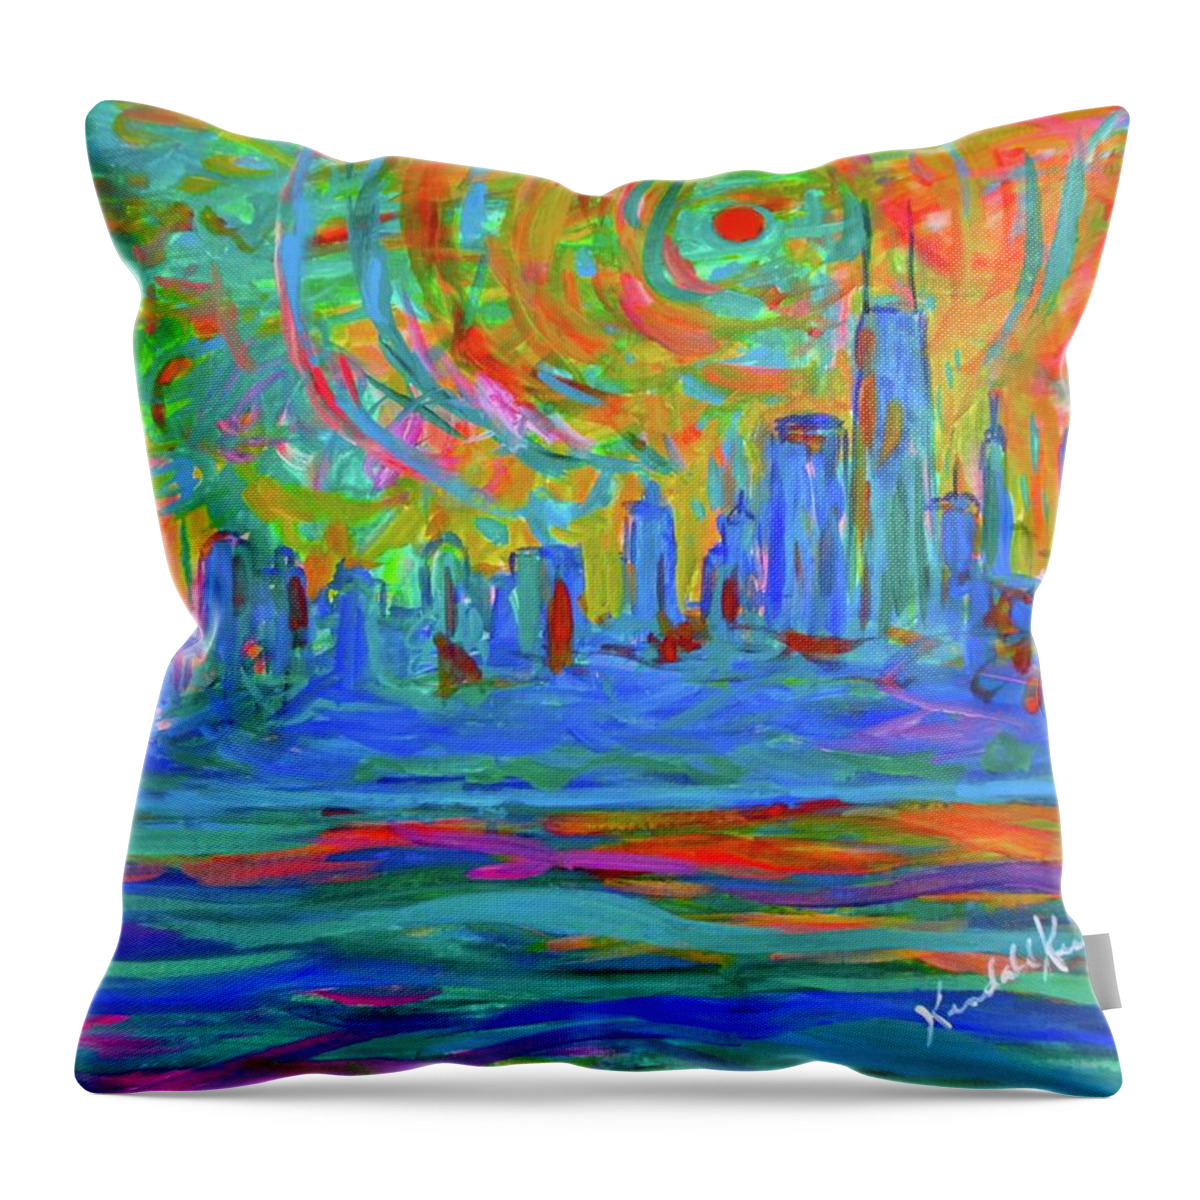 Chicago Prints For Sale Throw Pillow featuring the painting Wild Chicago Ride by Kendall Kessler